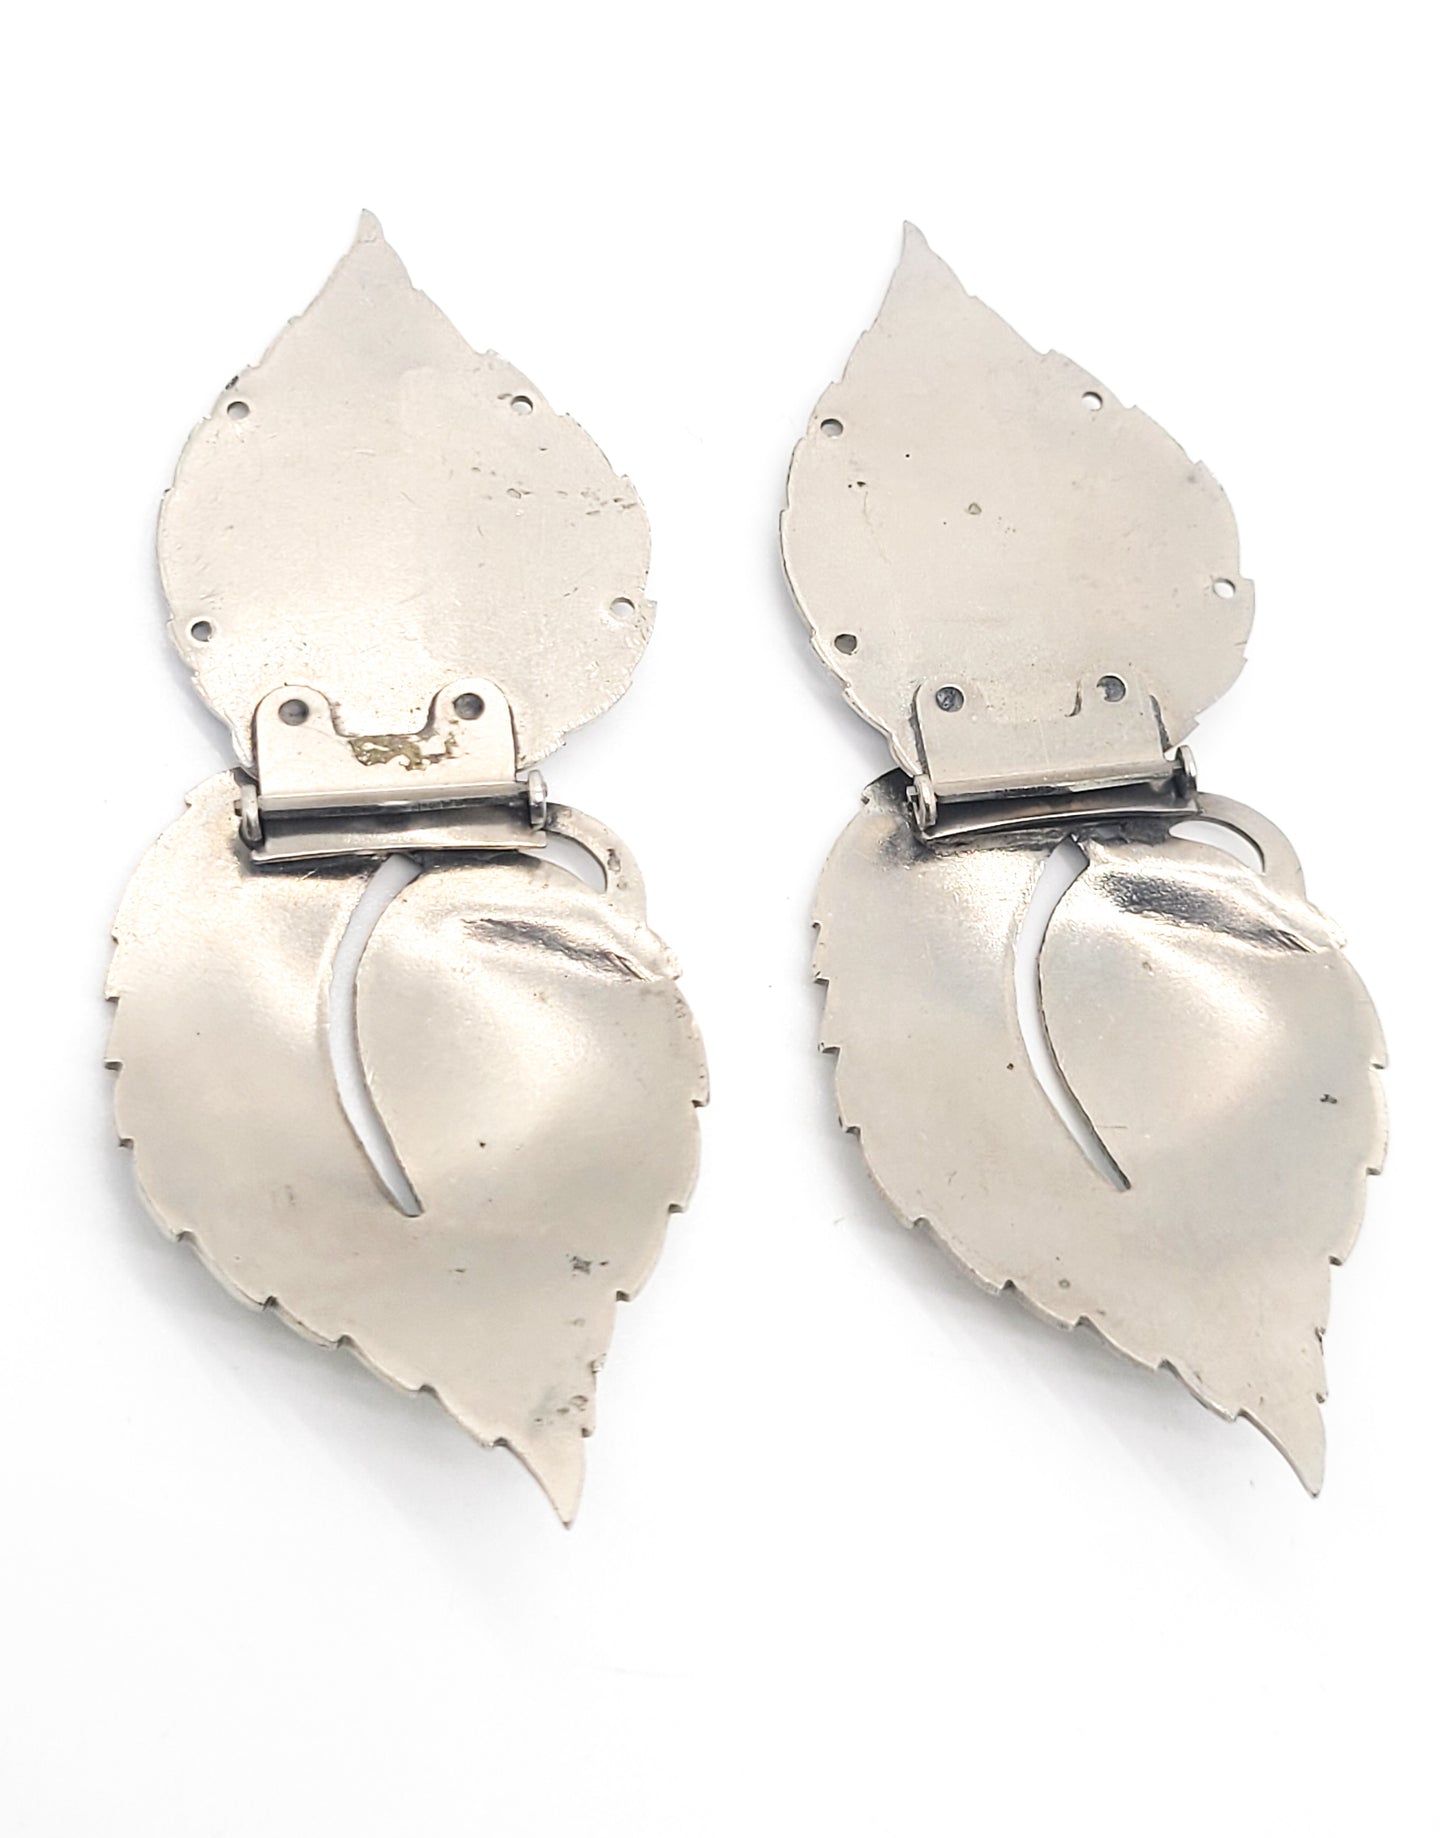 B. Blumenthal & Co jewelry Silver leaf vintage pair of Dress clips